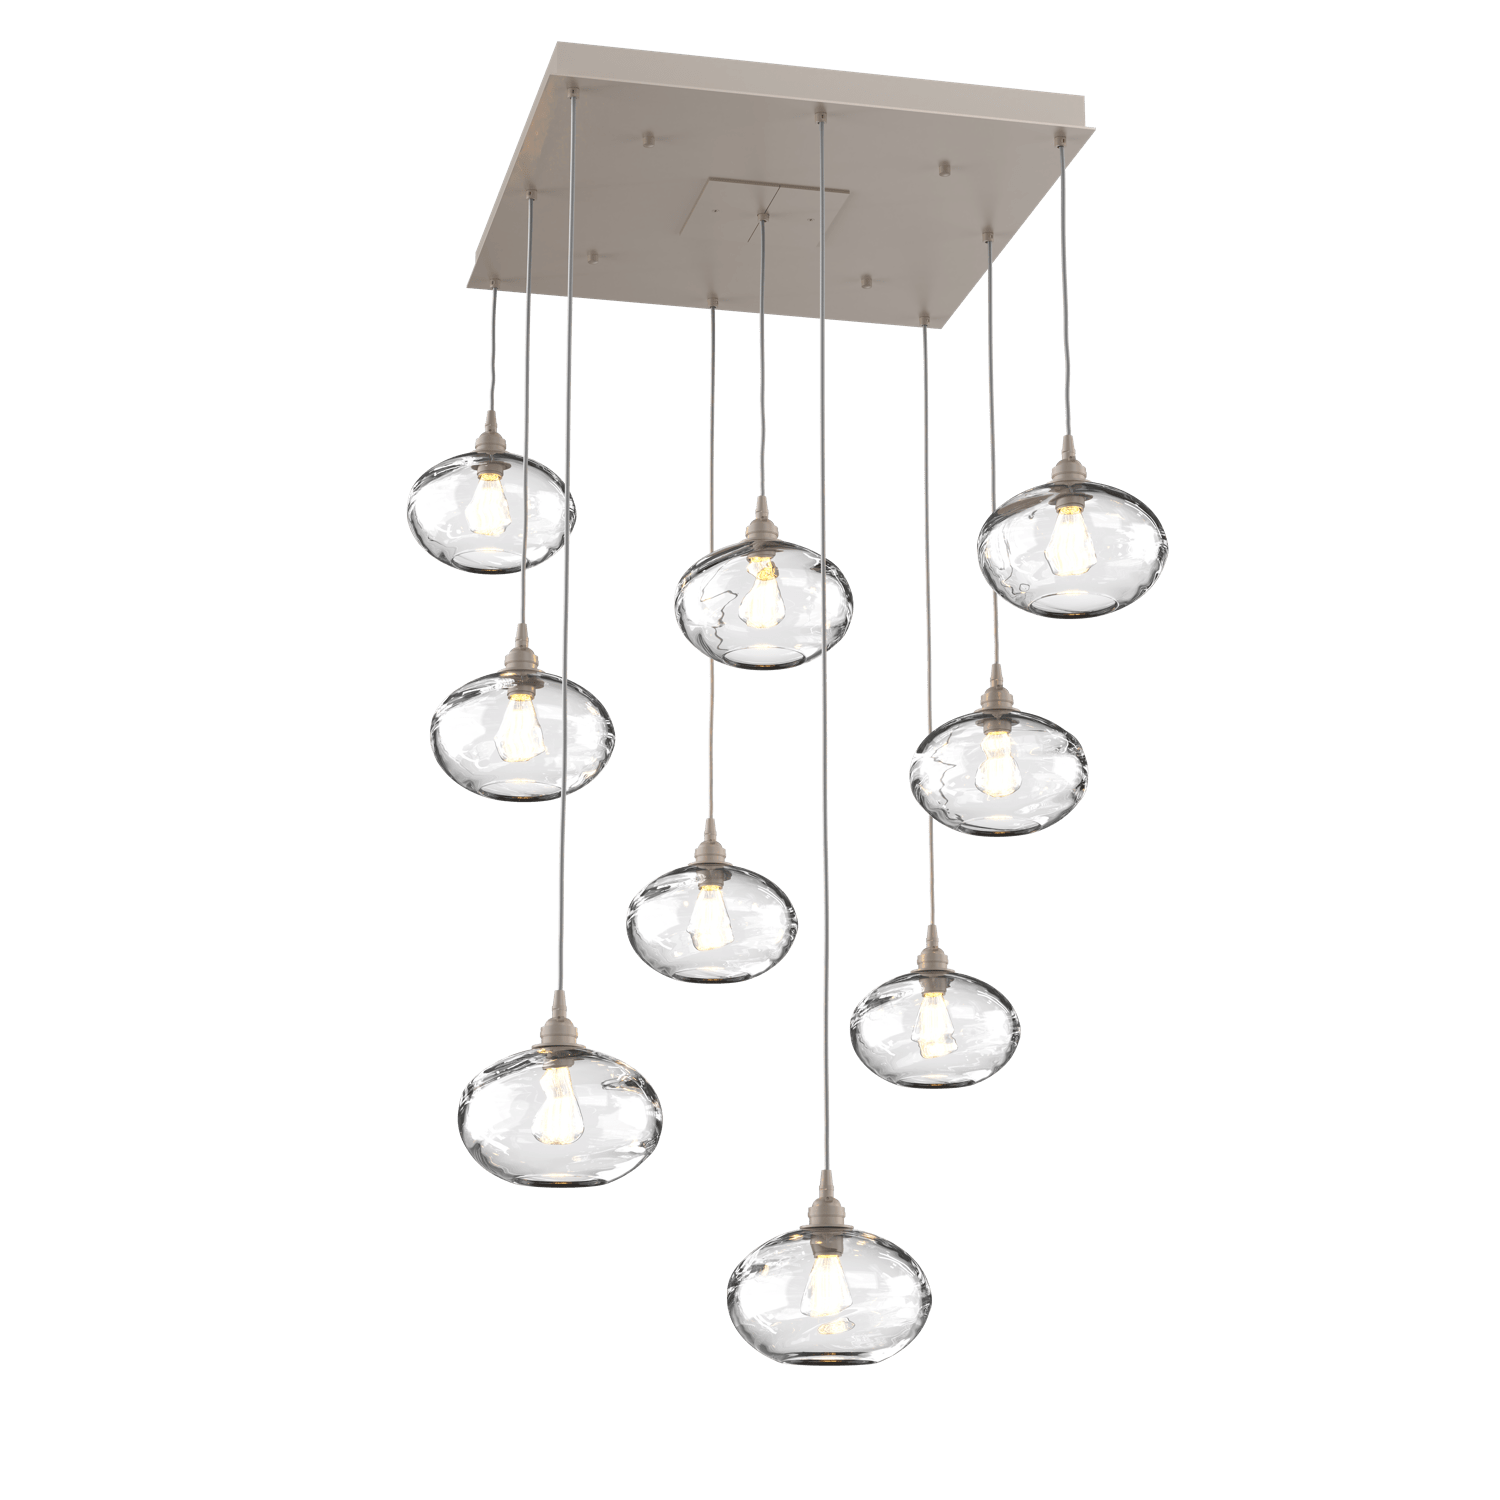 CHB0036-09-BS-OC-Hammerton-Studio-Optic-Blown-Glass-Coppa-9-light-square-pendant-chandelier-with-metallic-beige-silver-finish-and-optic-clear-blown-glass-shades-and-incandescent-lamping